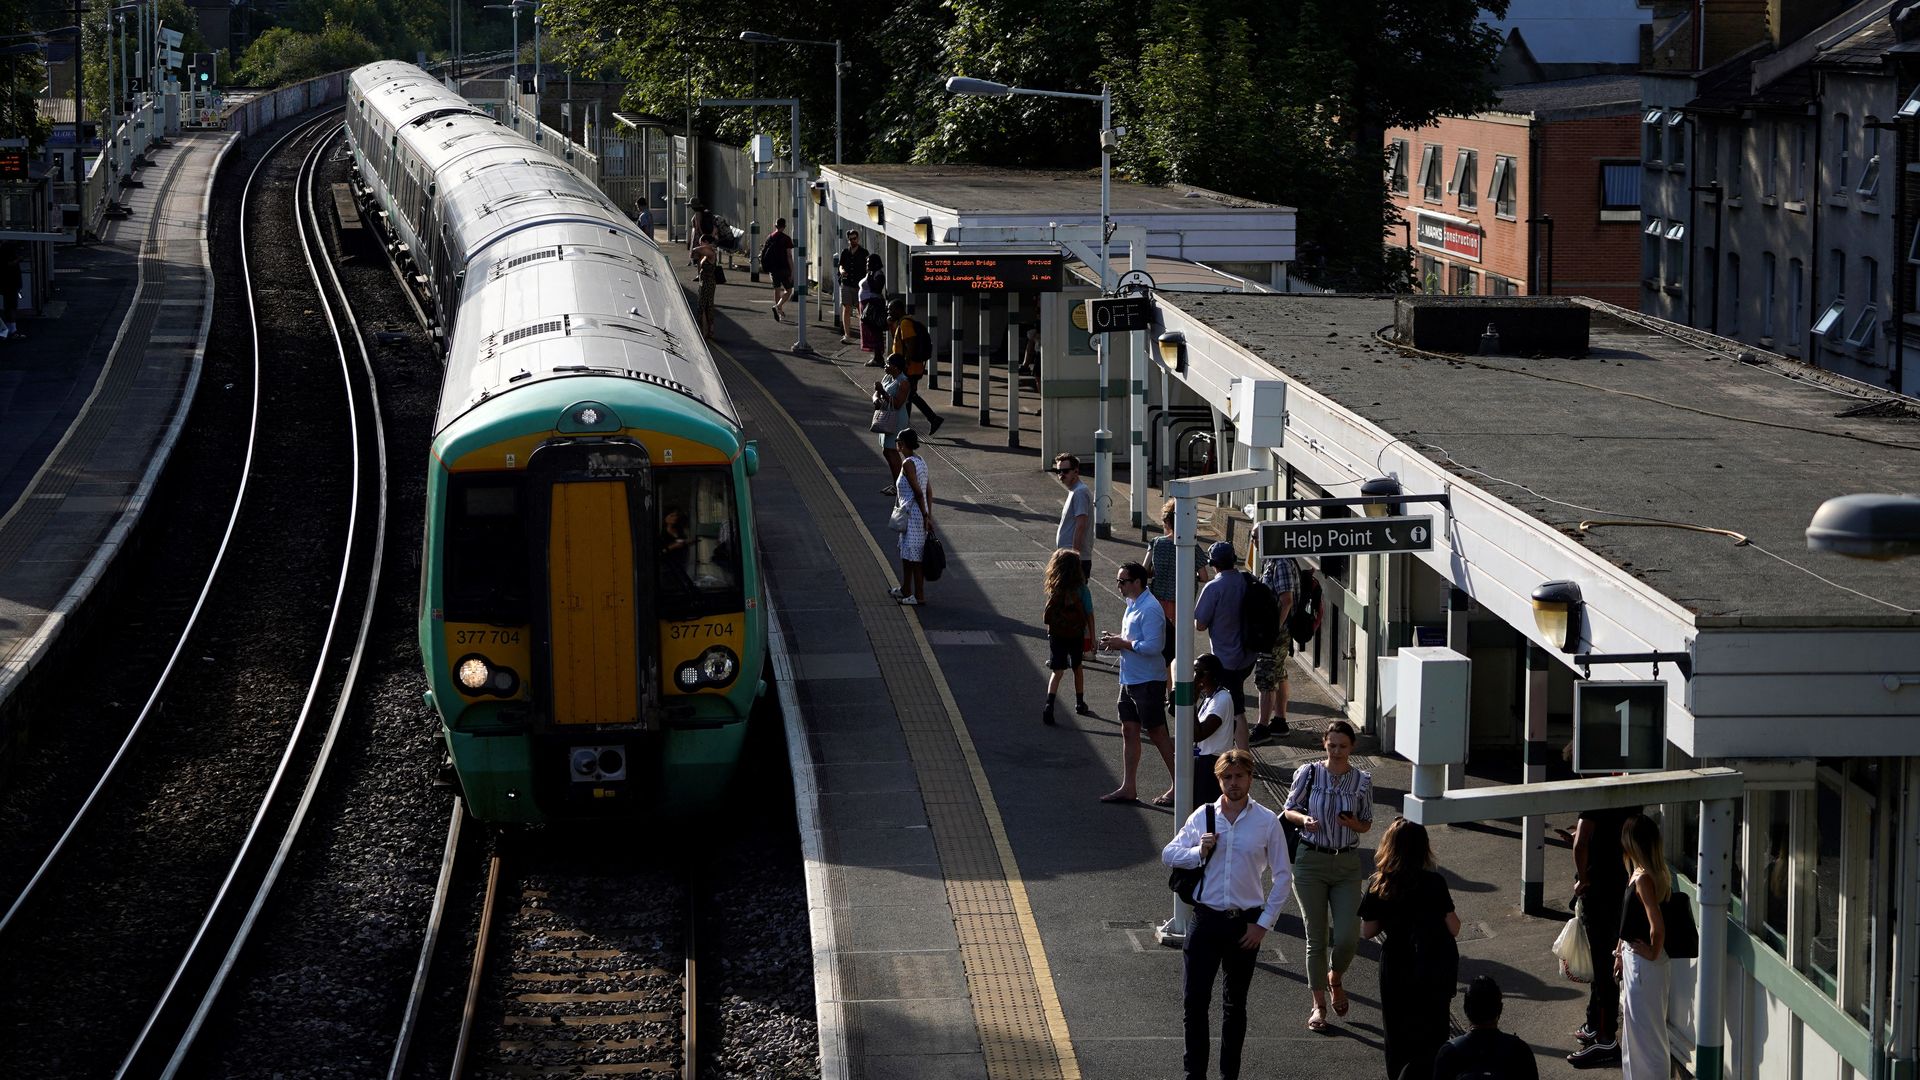 Commuters wait for their train on a platform at West Norwood station in south London on July 18.